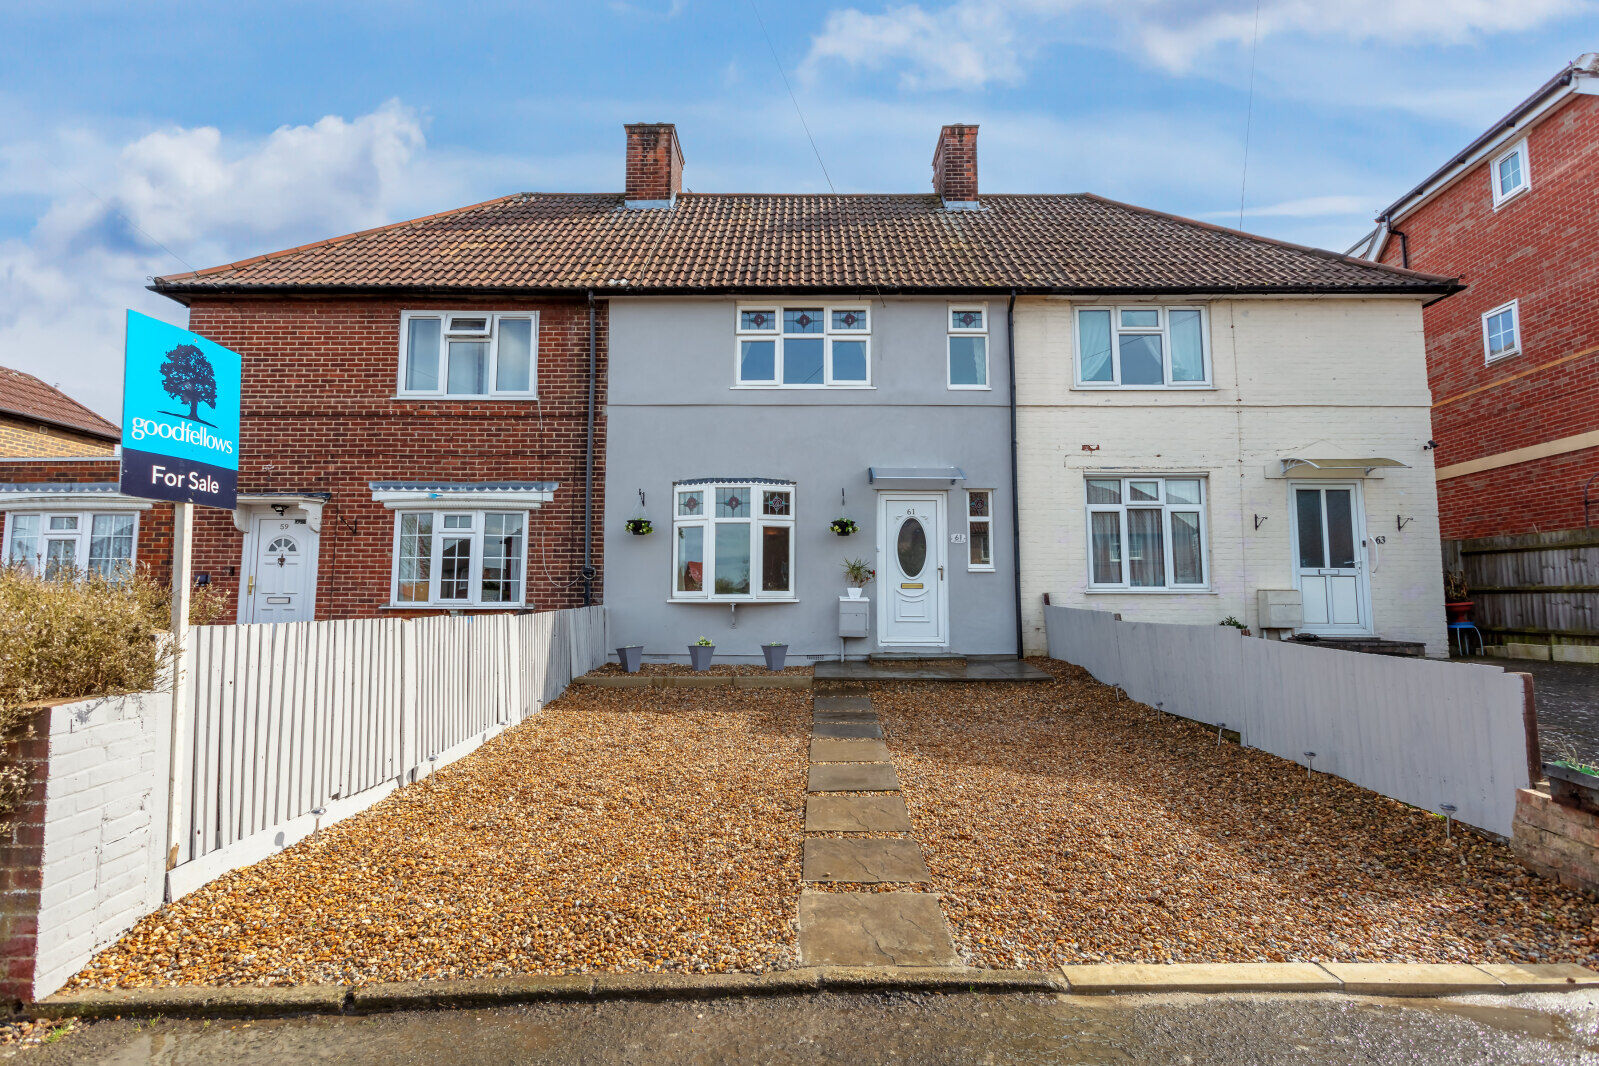 3 bedroom mid terraced house for sale Central Road, Morden, SM4, main image